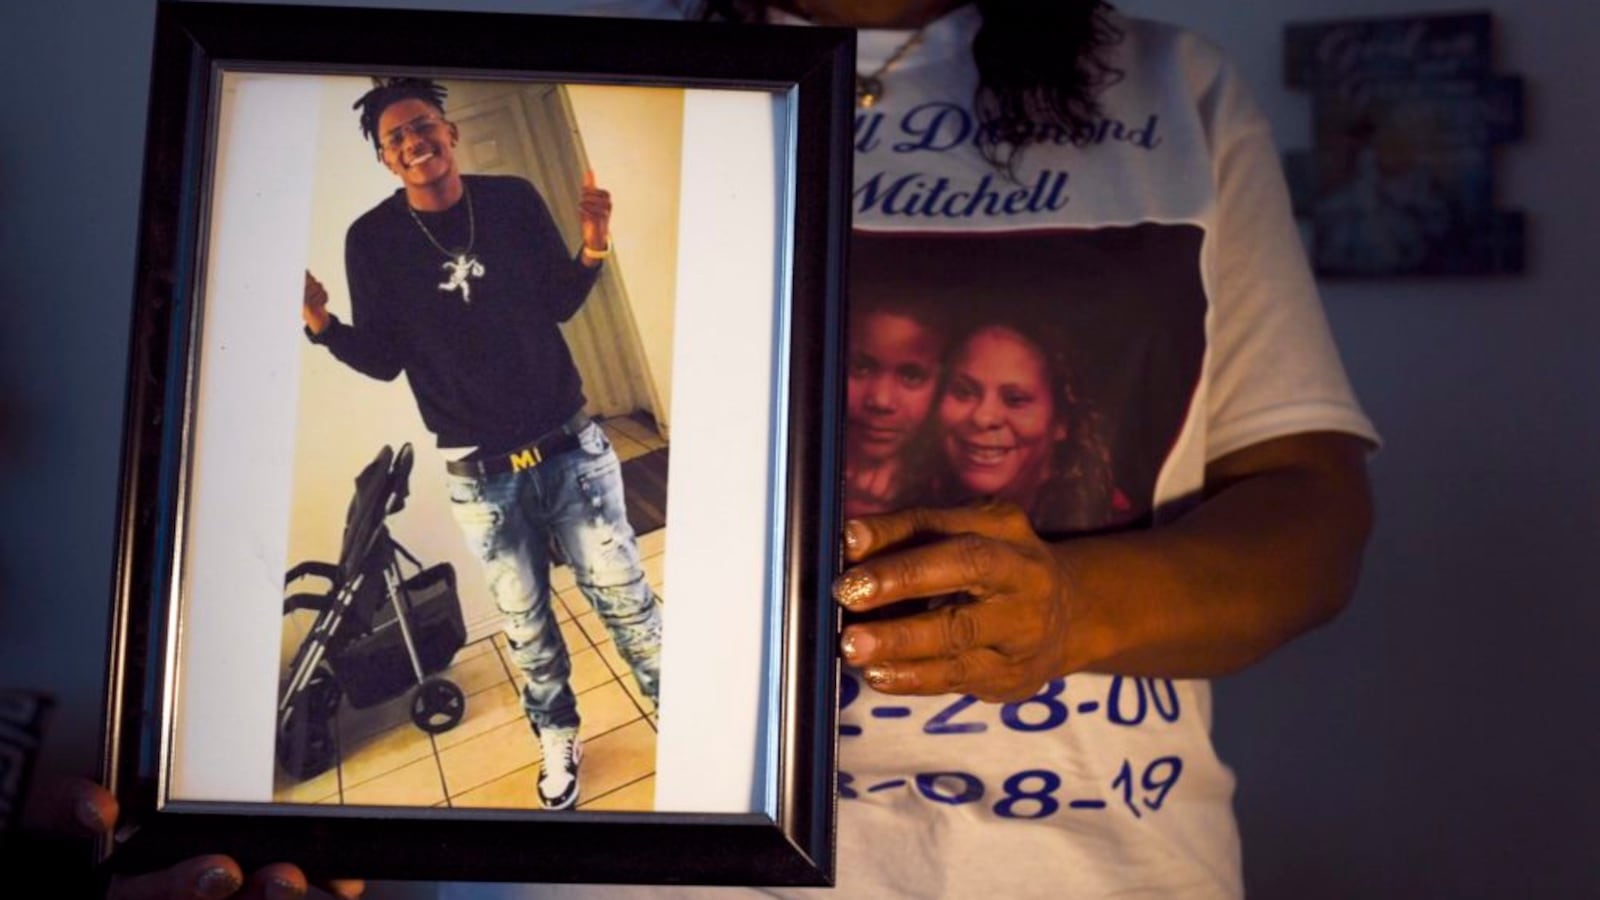 Metra Bell holds a photo of her 19-year-old son Darrell Mitchell, who was shot and killed in August 2019. The Denver school board observed a moment of silence at its January 2020 meeting for students lost to gun violence, including Mitchell.